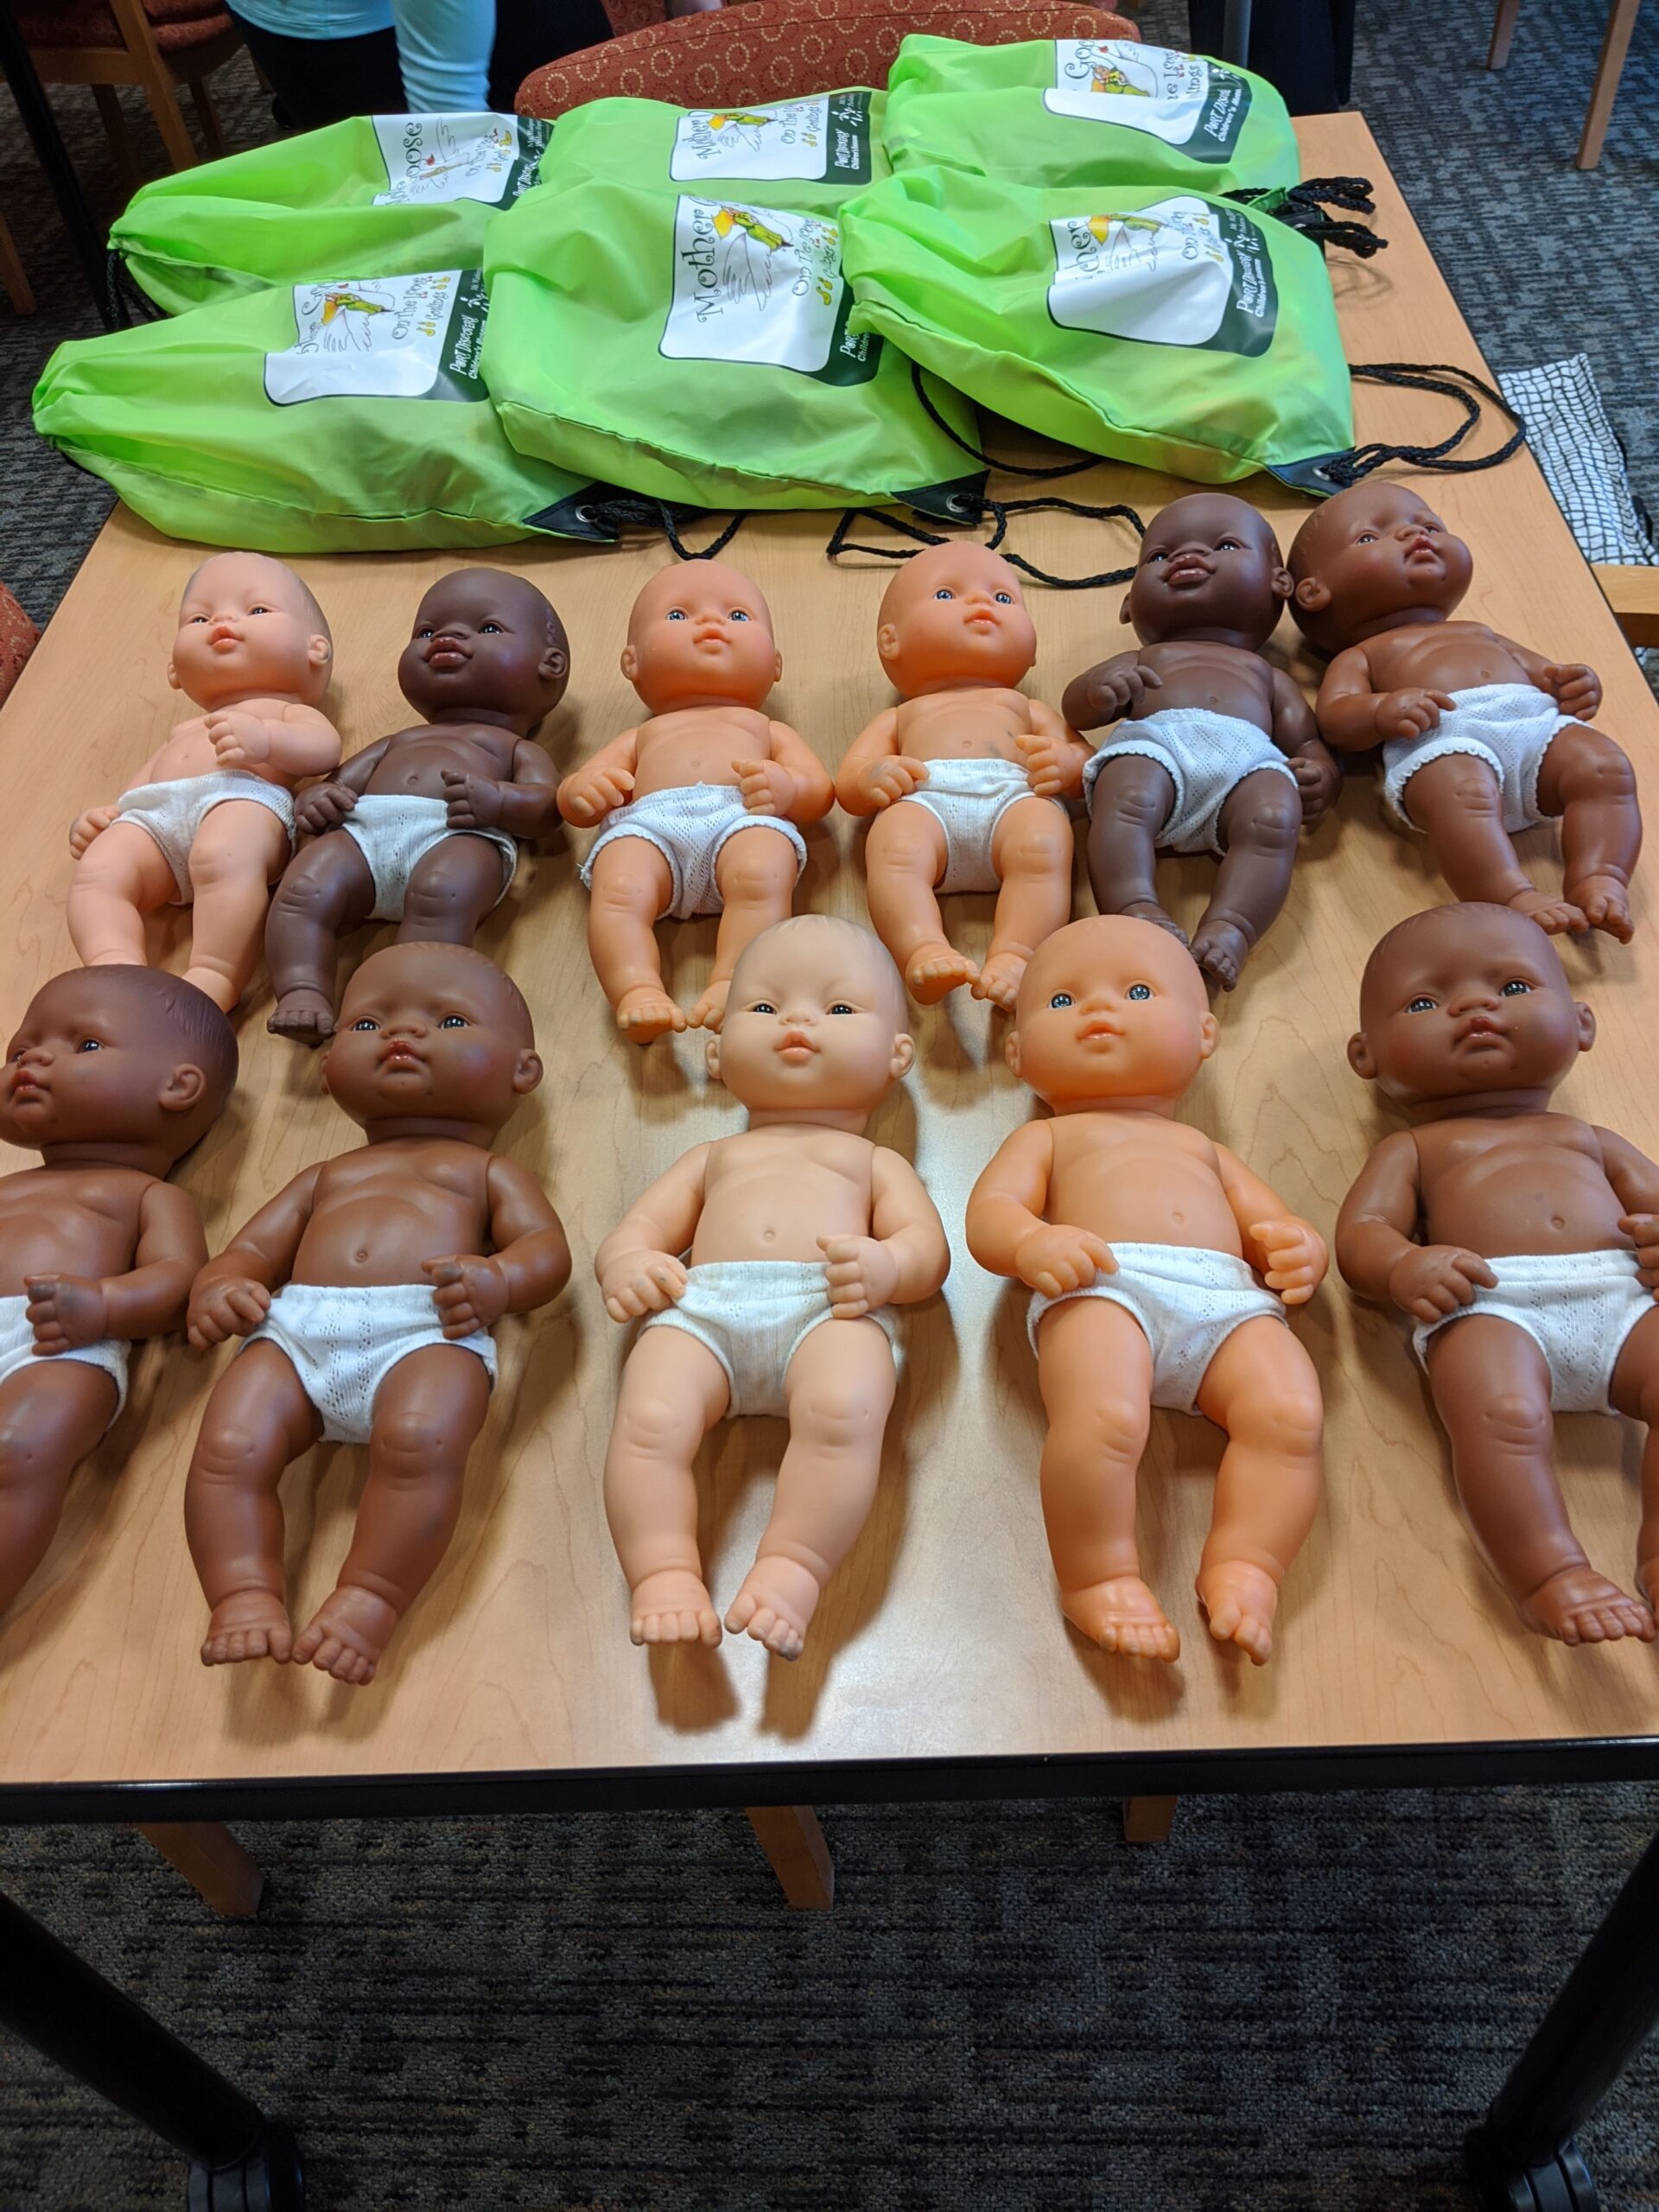 Dolls and Bags Used in Goslings Programs